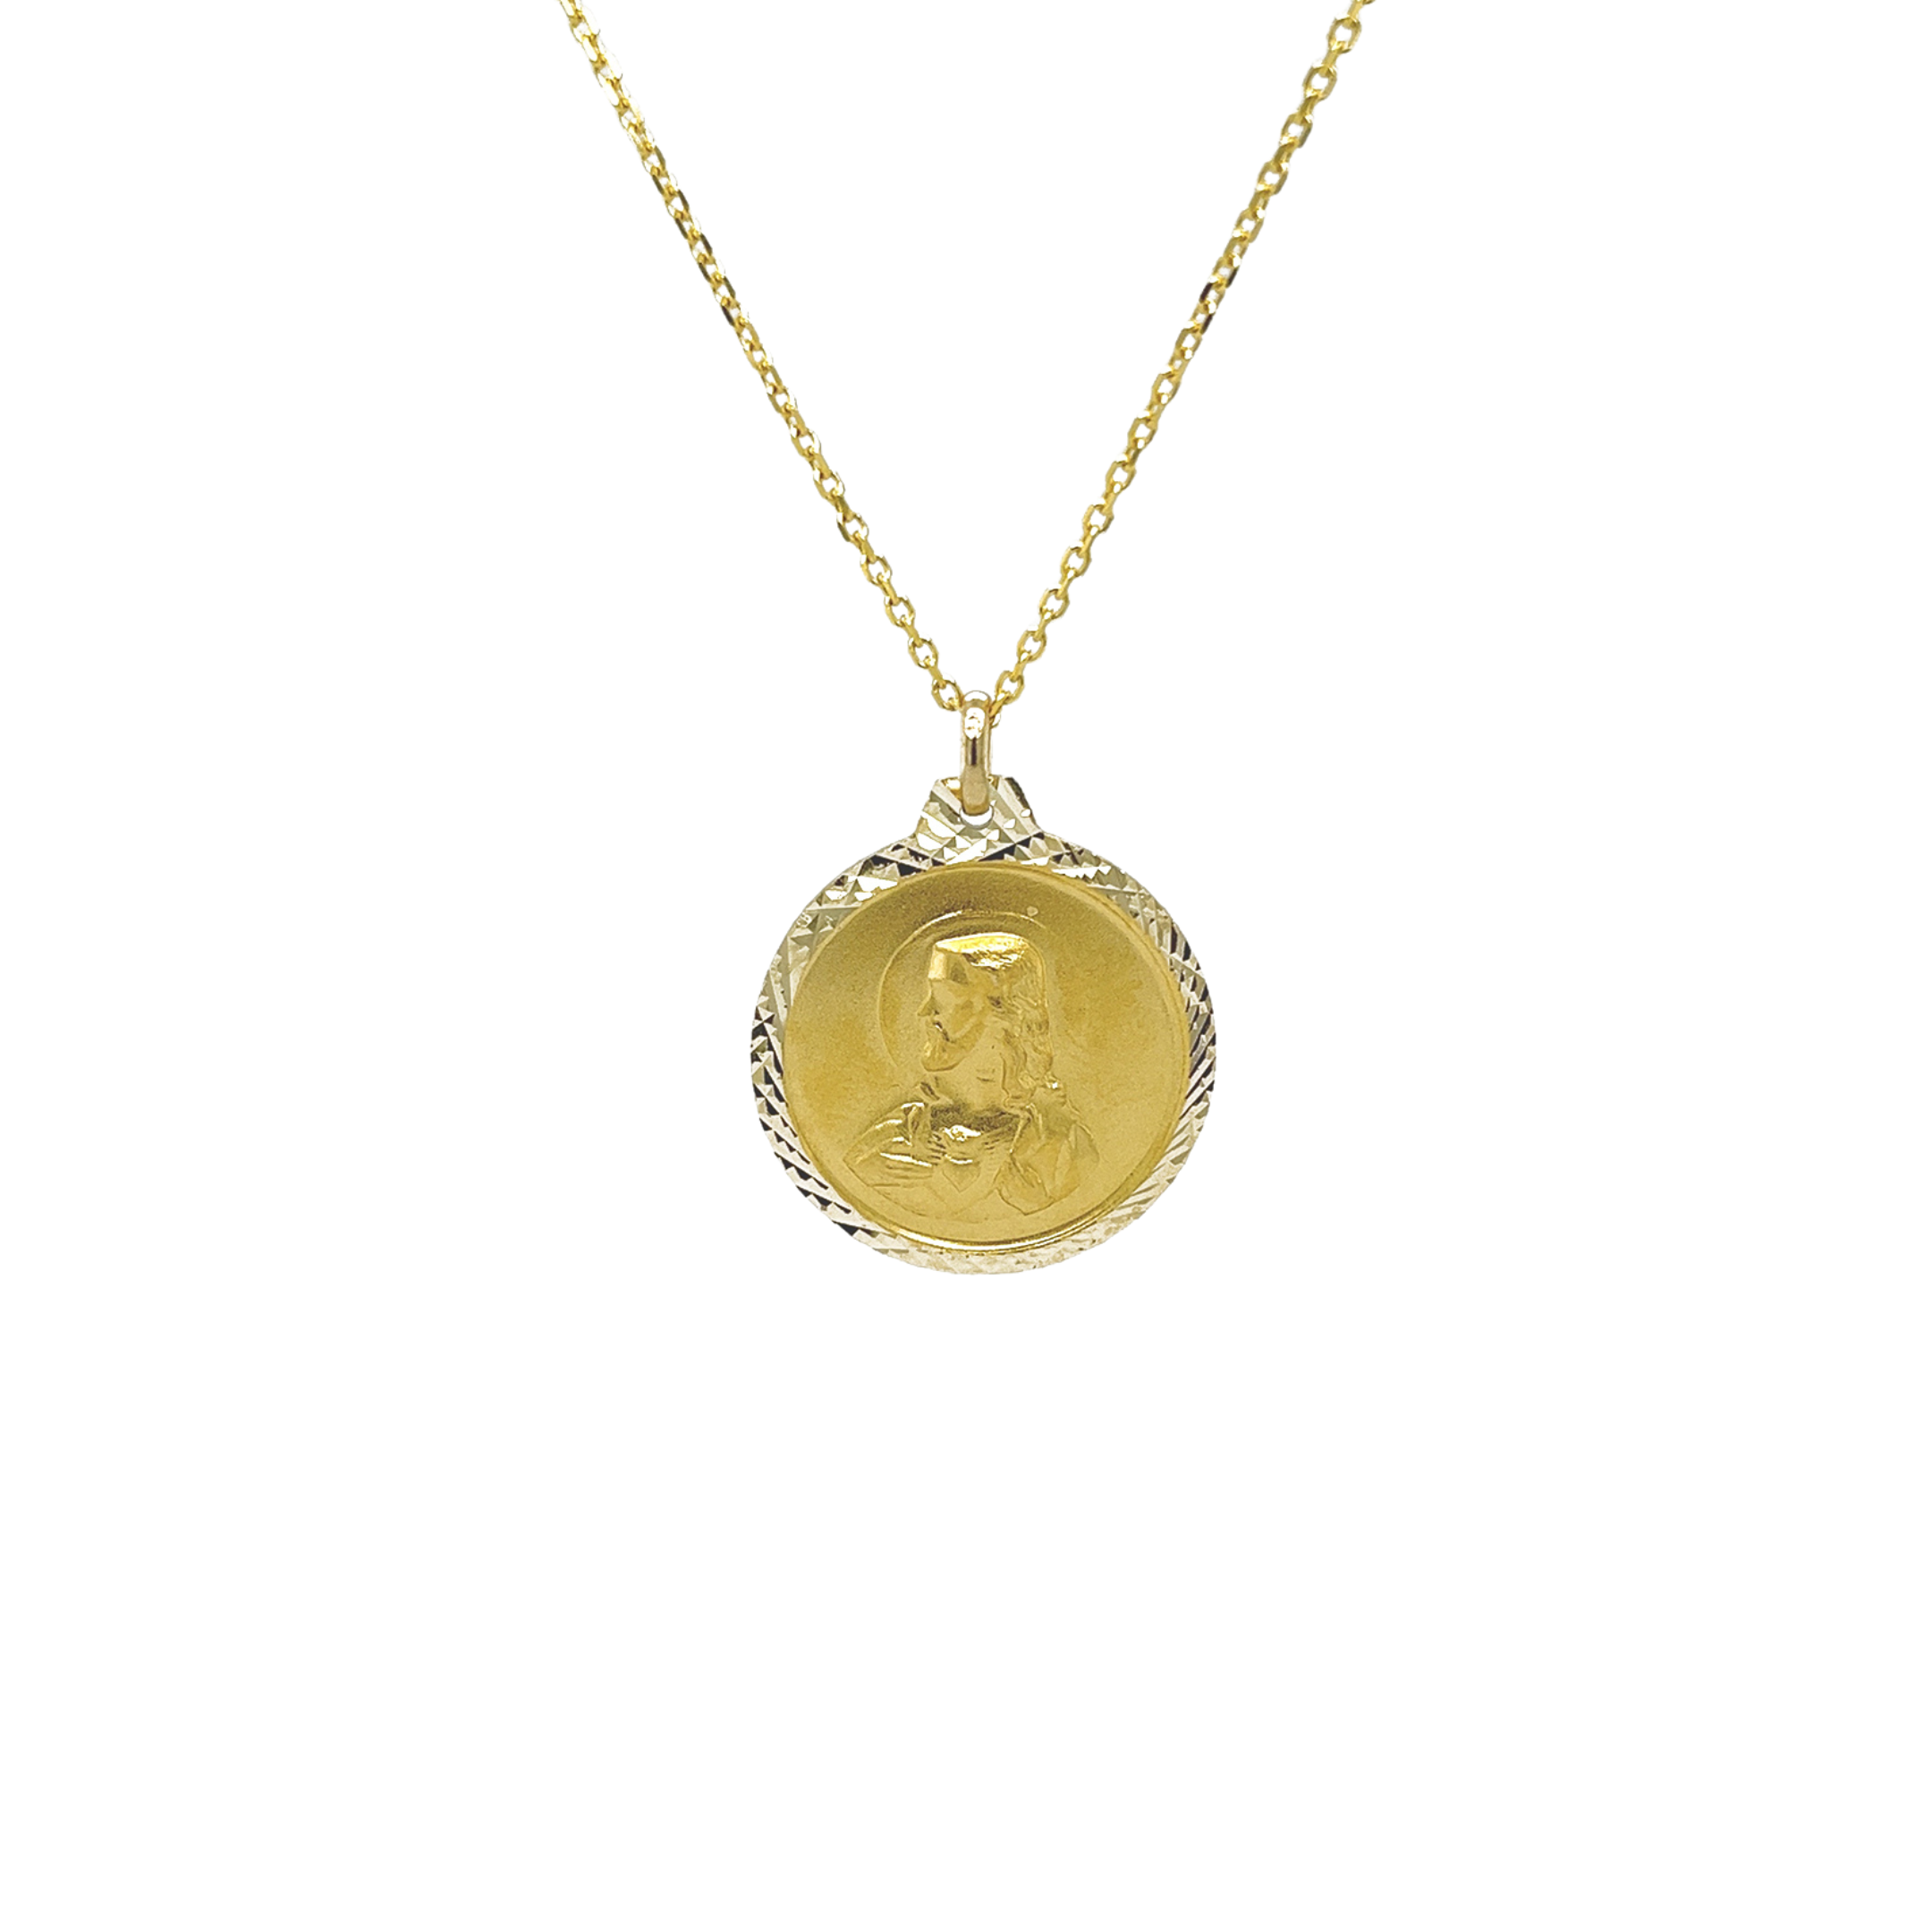 Past auction: A Mexican gold coin pendant with chain | December 15, 2016